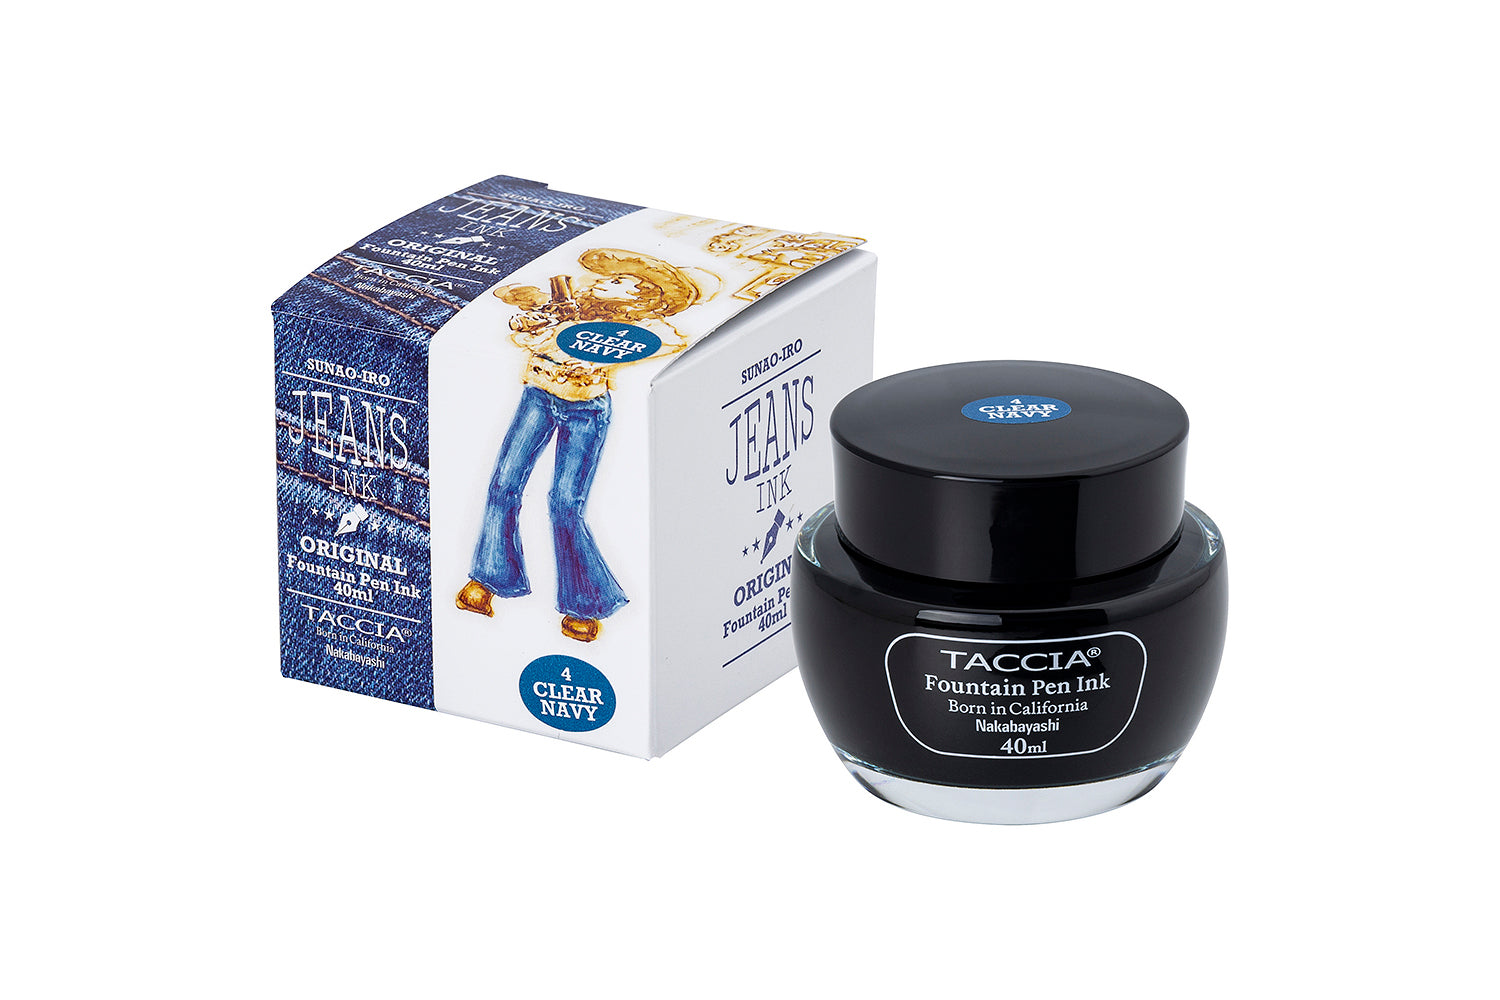 Taccia Jeans - Clear Navy - Fountain pen ink 40ml